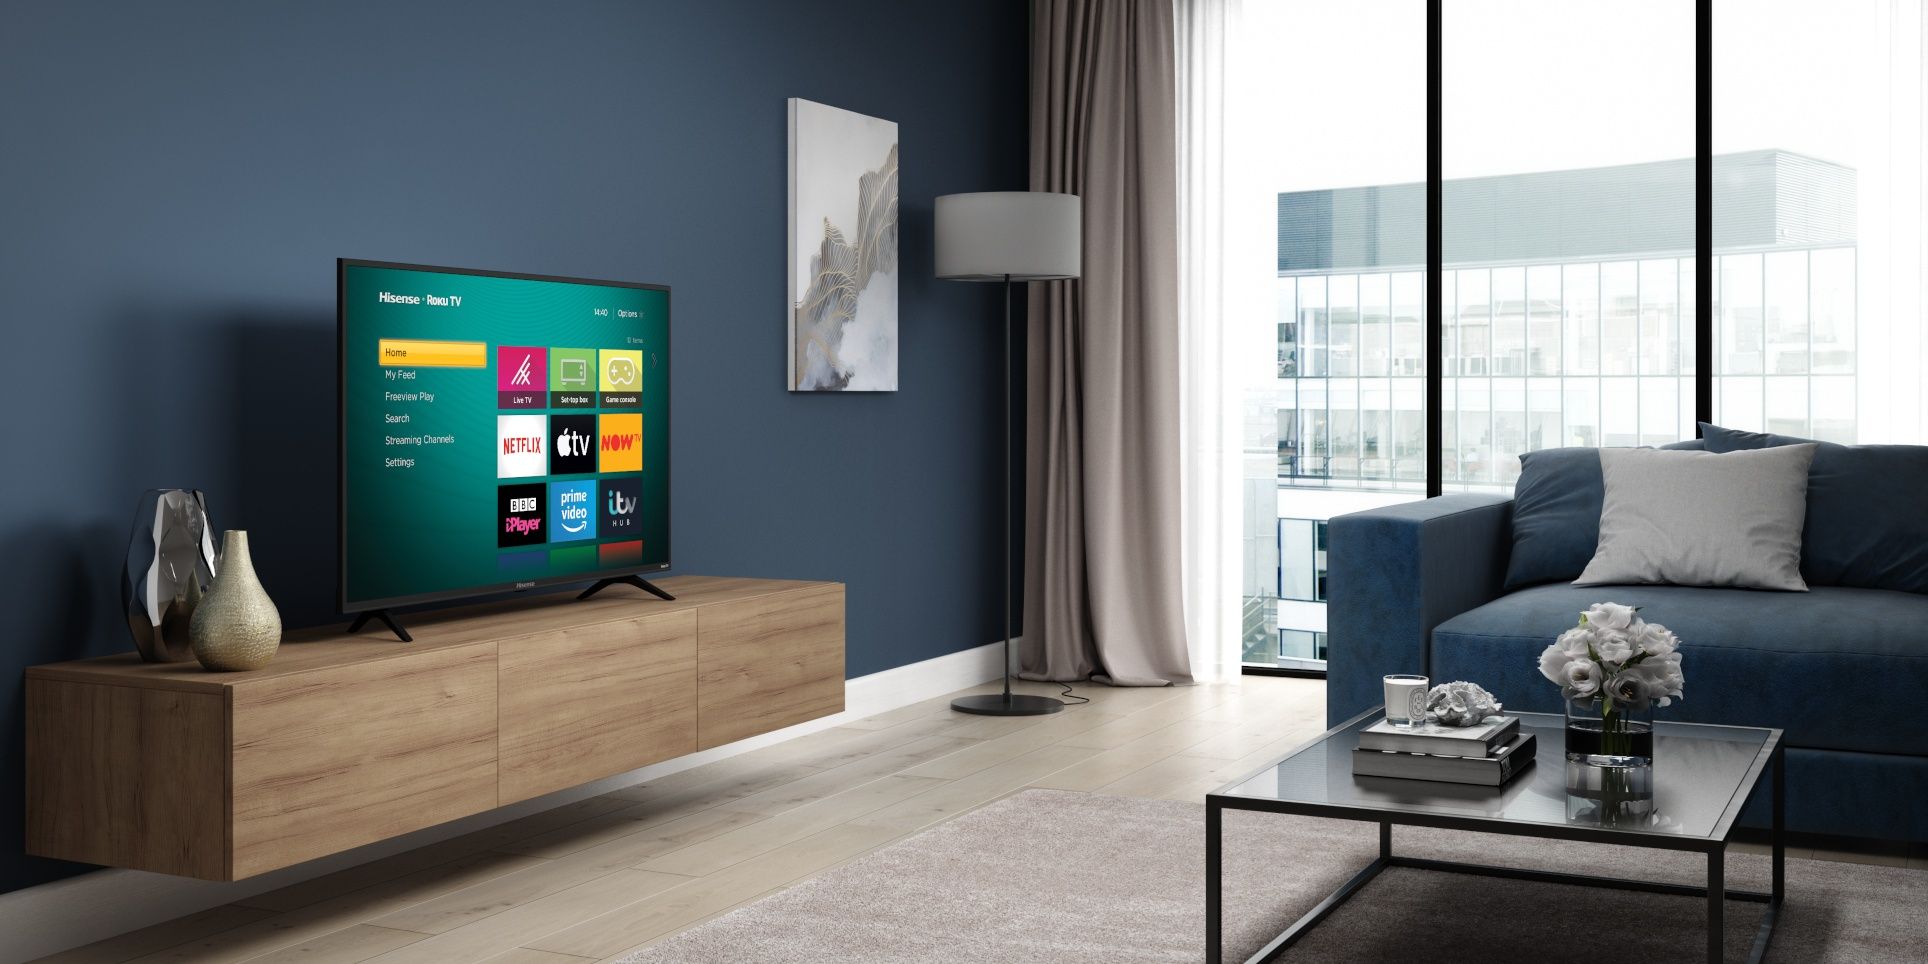 A living room with a Hisense Smart TV